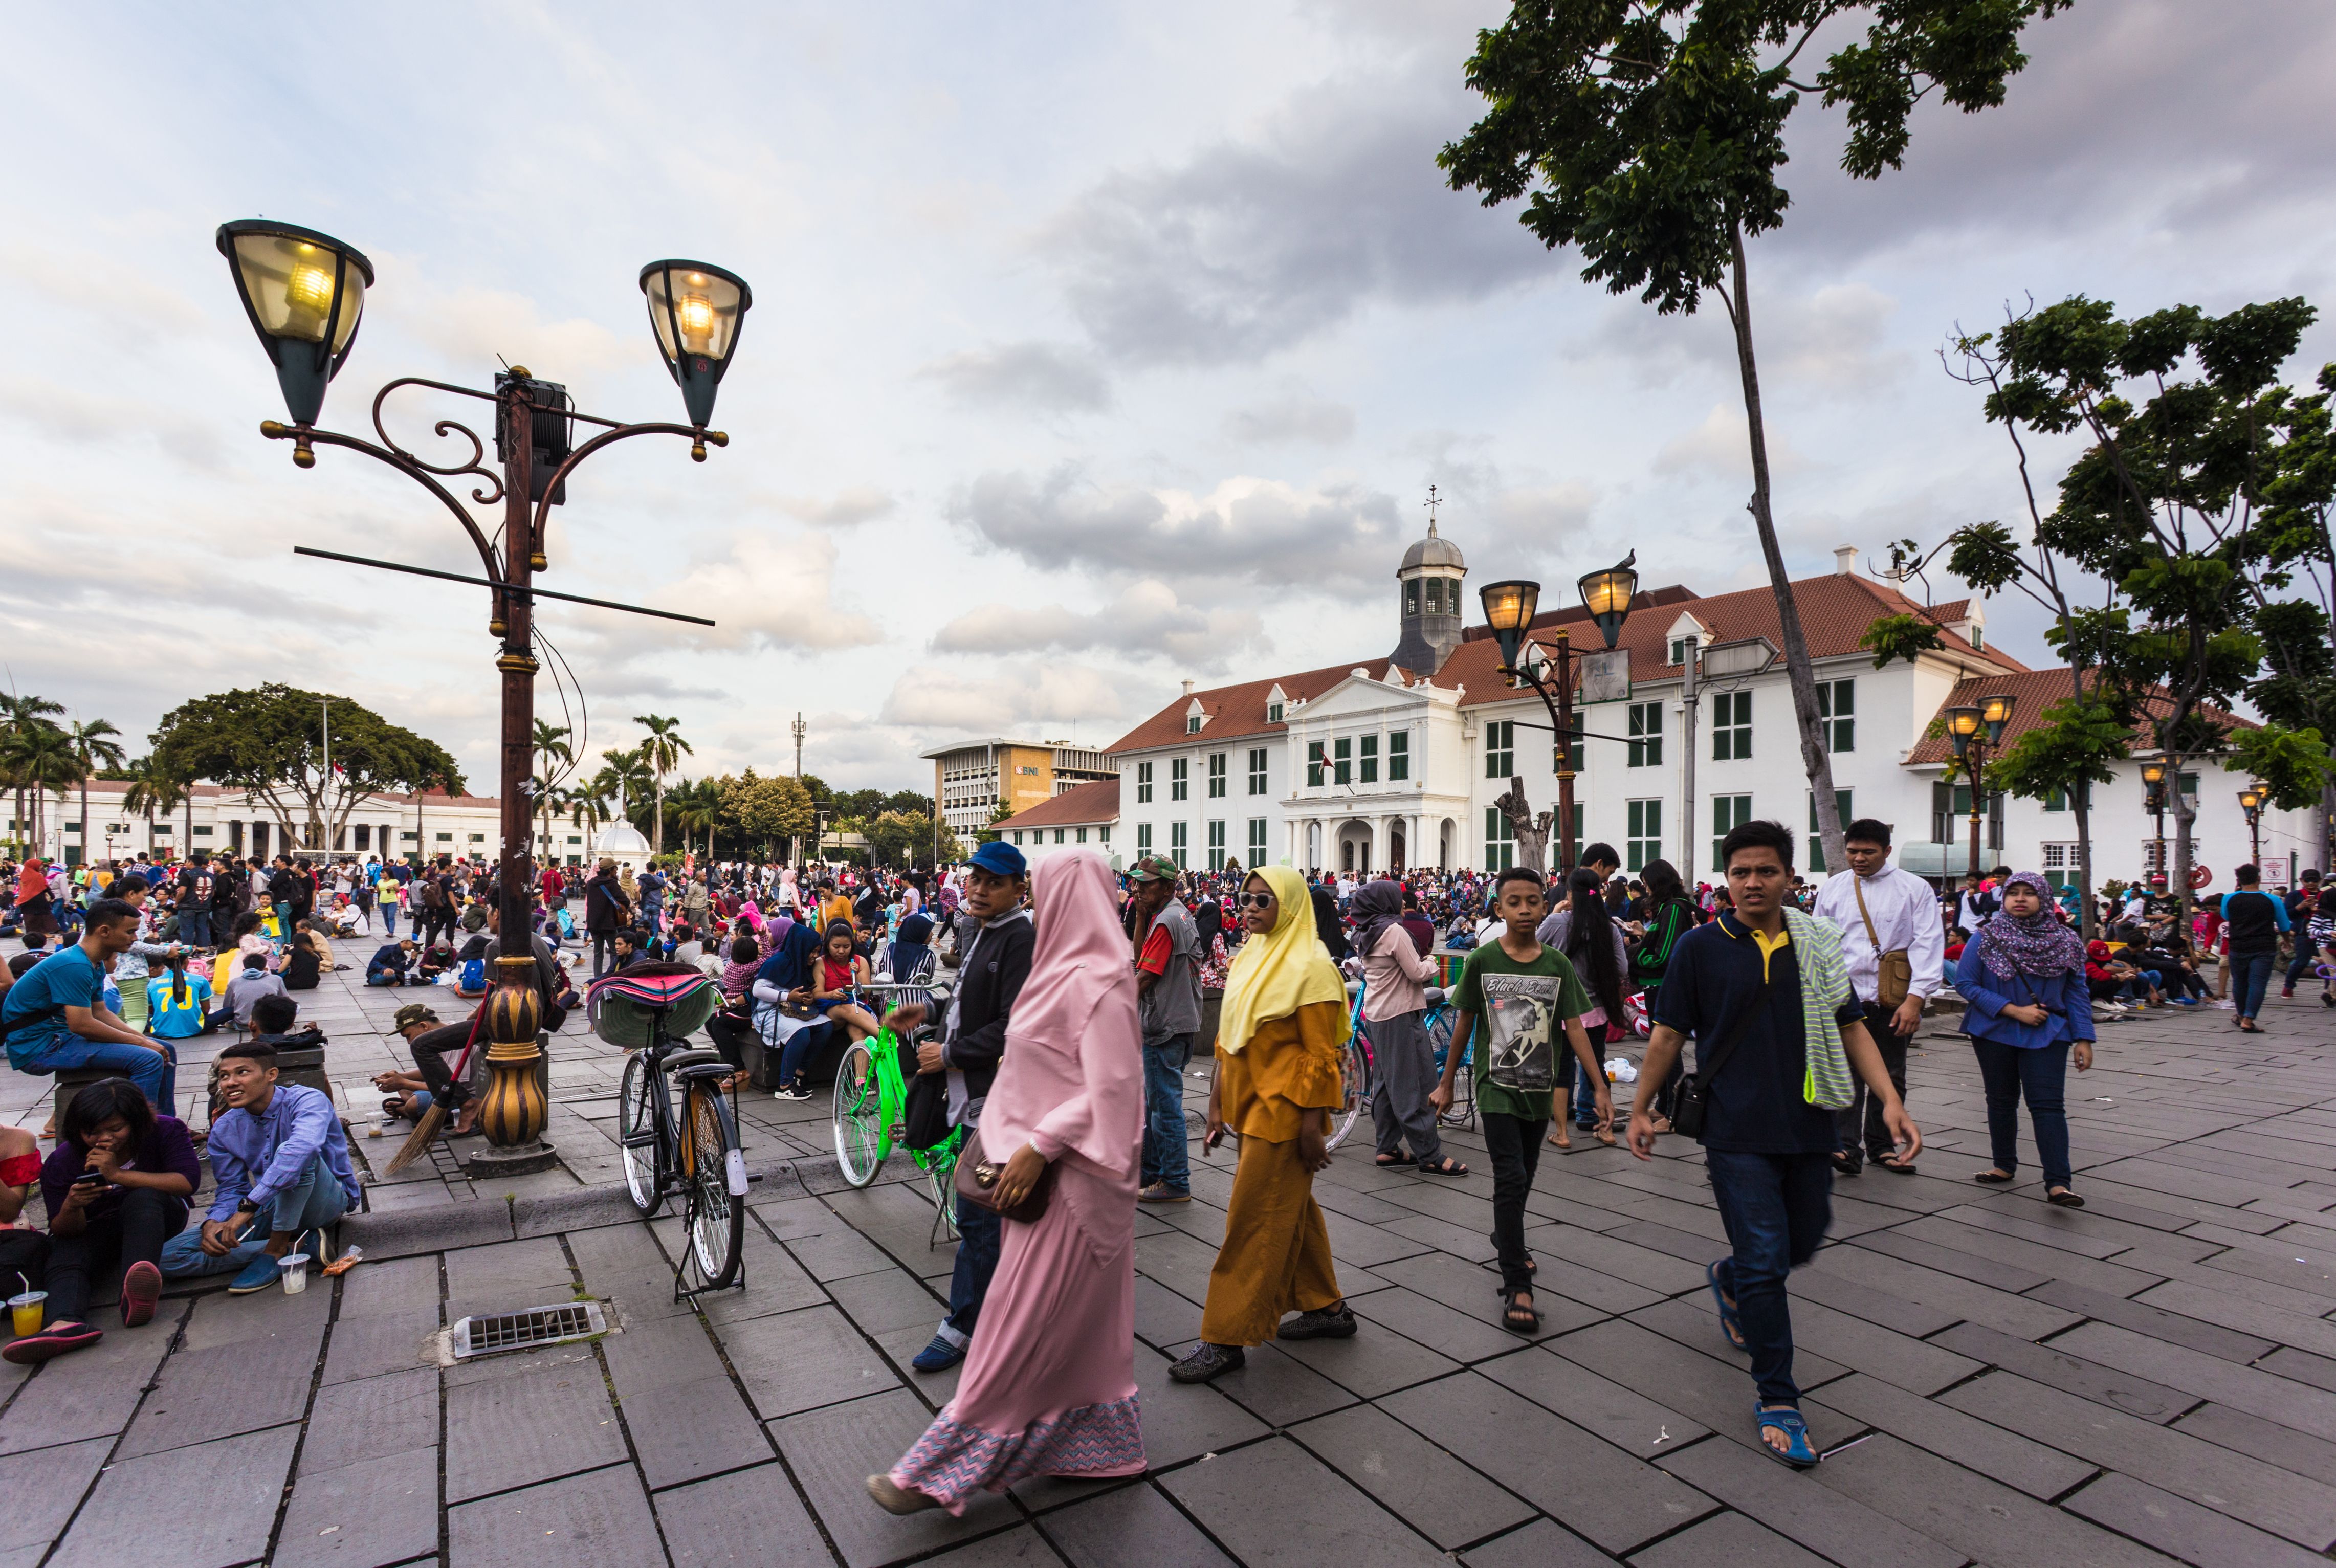 A large crowd of local people spend their Sunday afternoon around the fatahillah Square in Jakarta colonial old town named Kota. Image courtesy of AsiaTravel/Shutterstock. Indonesia, 2017.